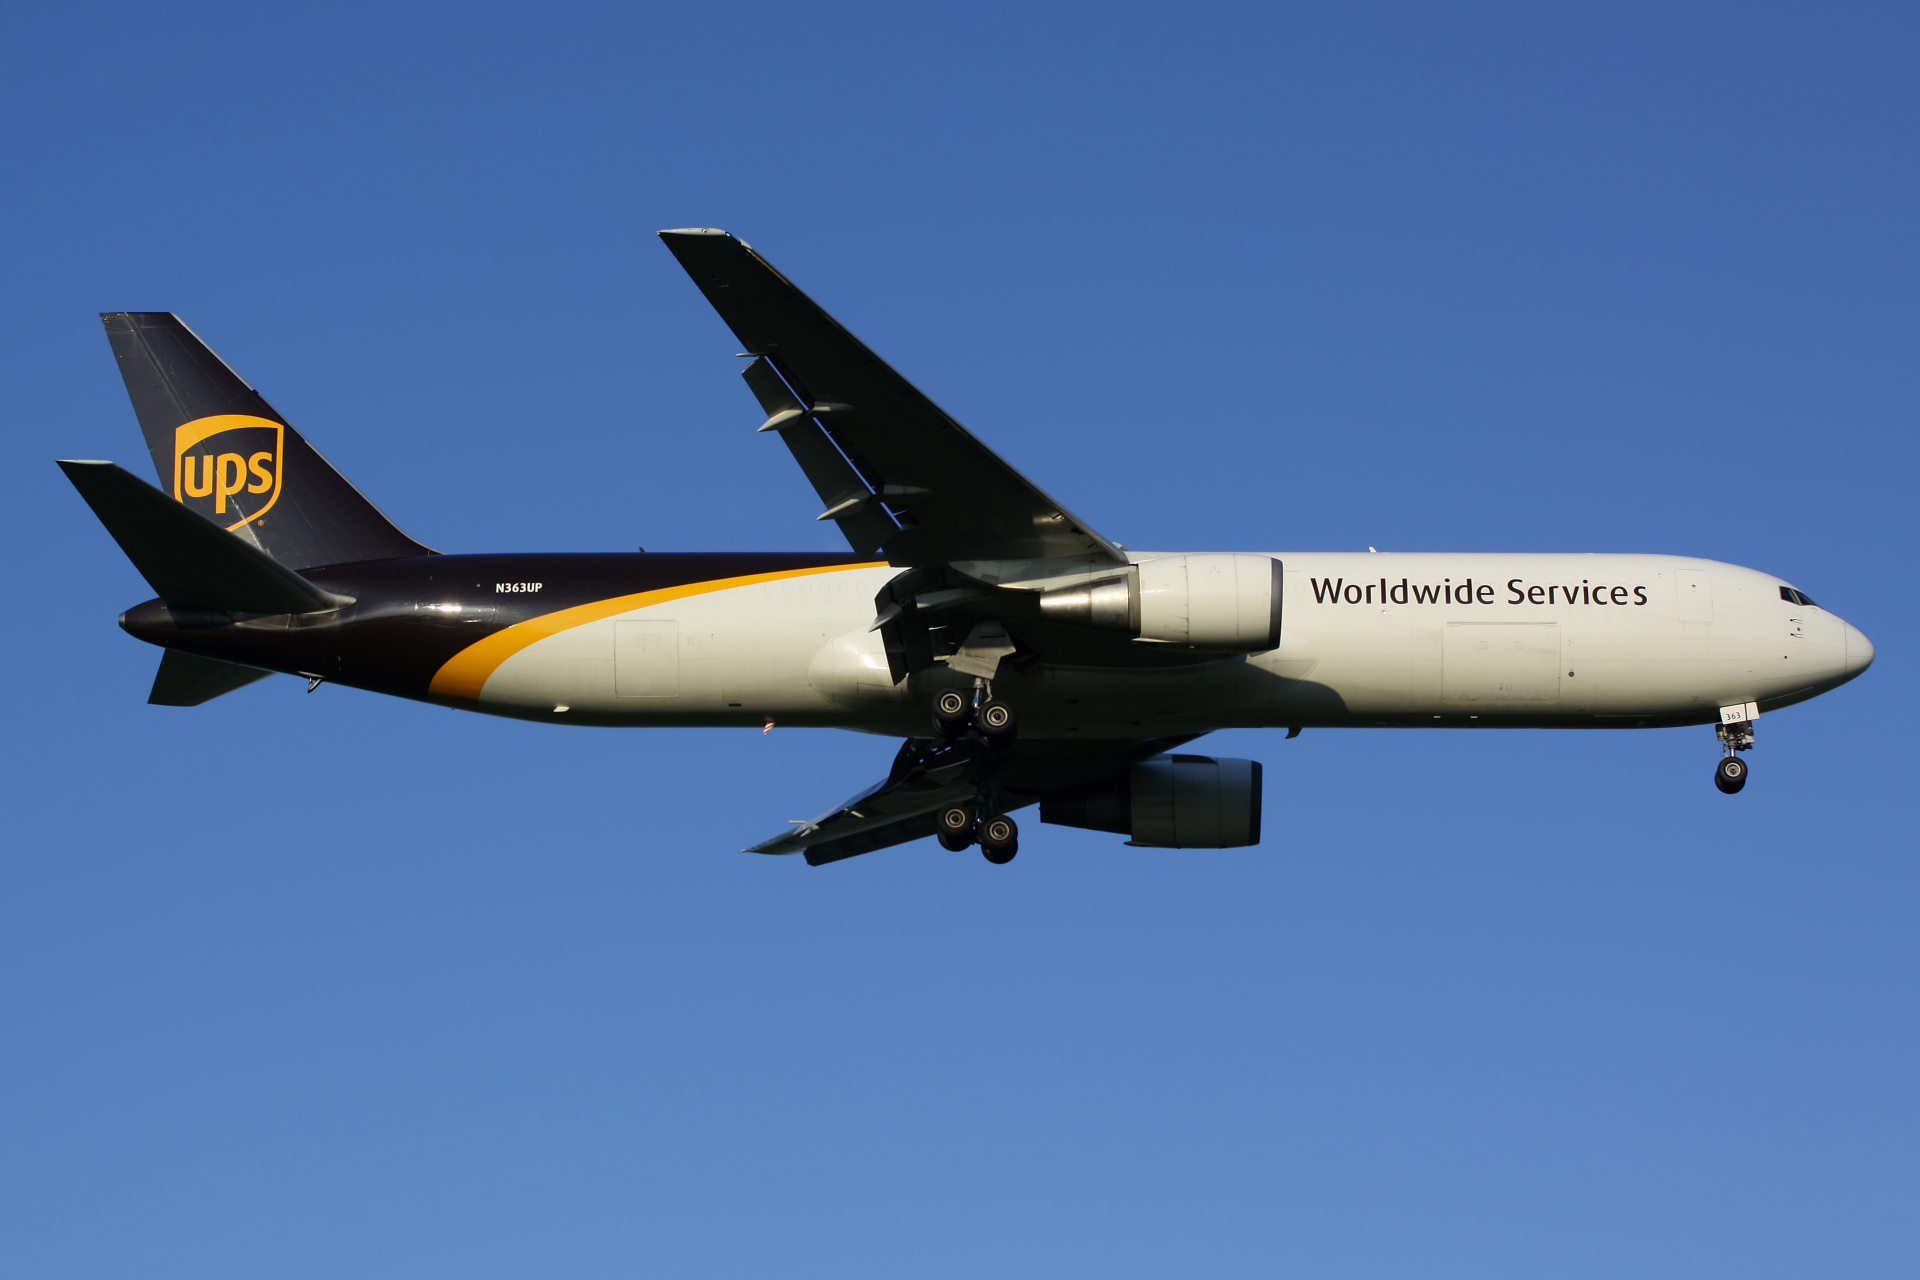 BCF, N363UP, United Parcel Service (UPS) Airlines (Aircraft » EPWA Spotting » Boeing 767-300F)